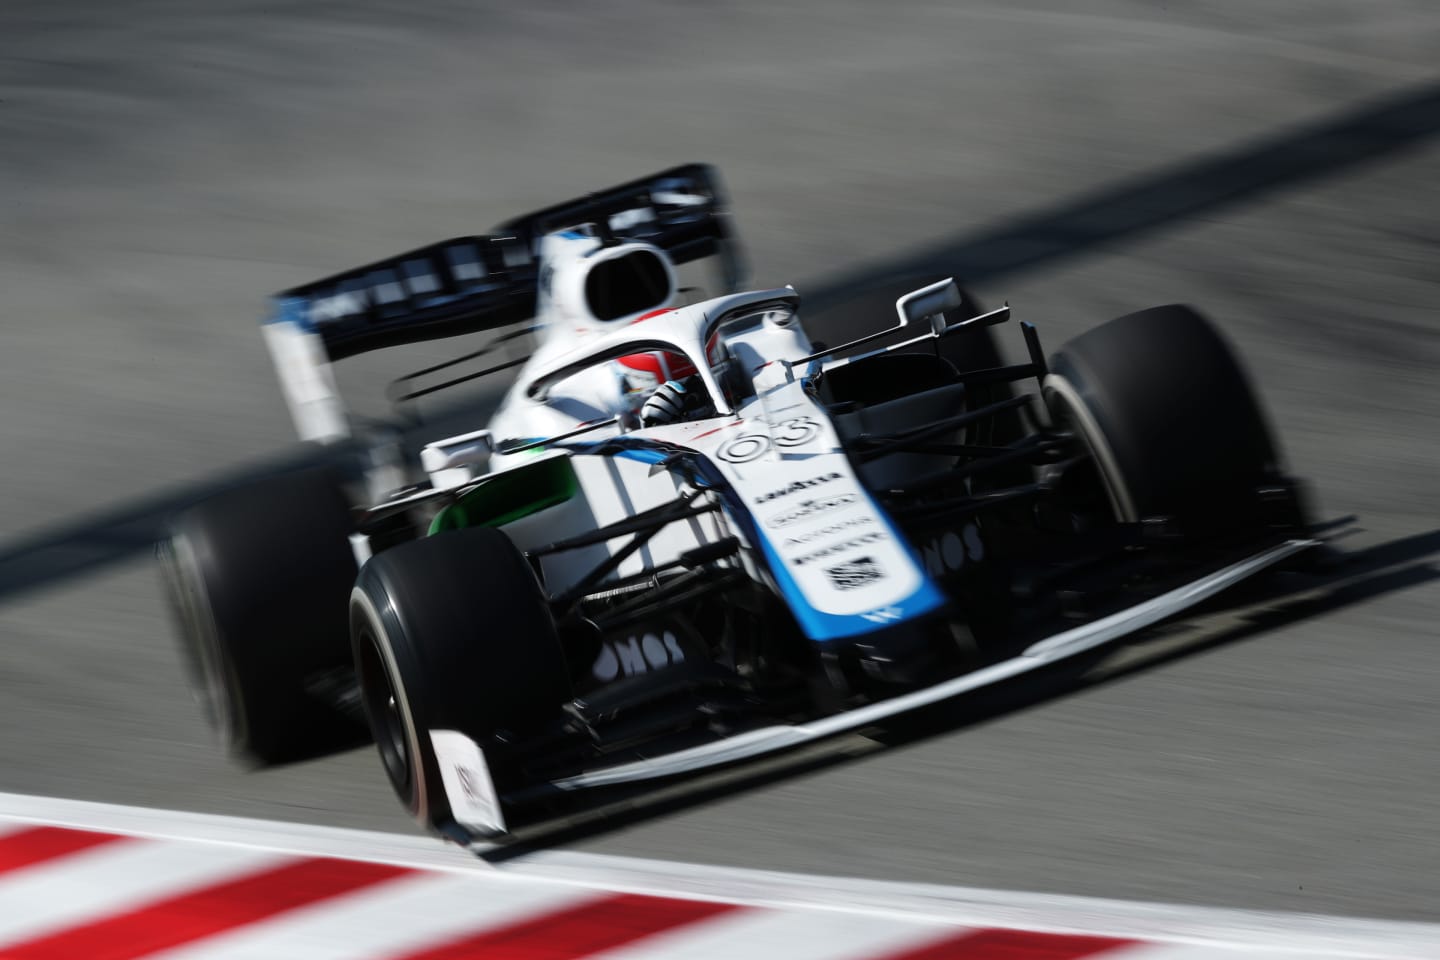 BARCELONA, SPAIN - AUGUST 14: George Russell of Great Britain driving the (63) Williams Racing FW43 Mercedes on track during practice for the F1 Grand Prix of Spain at Circuit de Barcelona-Catalunya on August 14, 2020 in Barcelona, Spain. (Photo by Albert Gea/Pool via Getty Images)